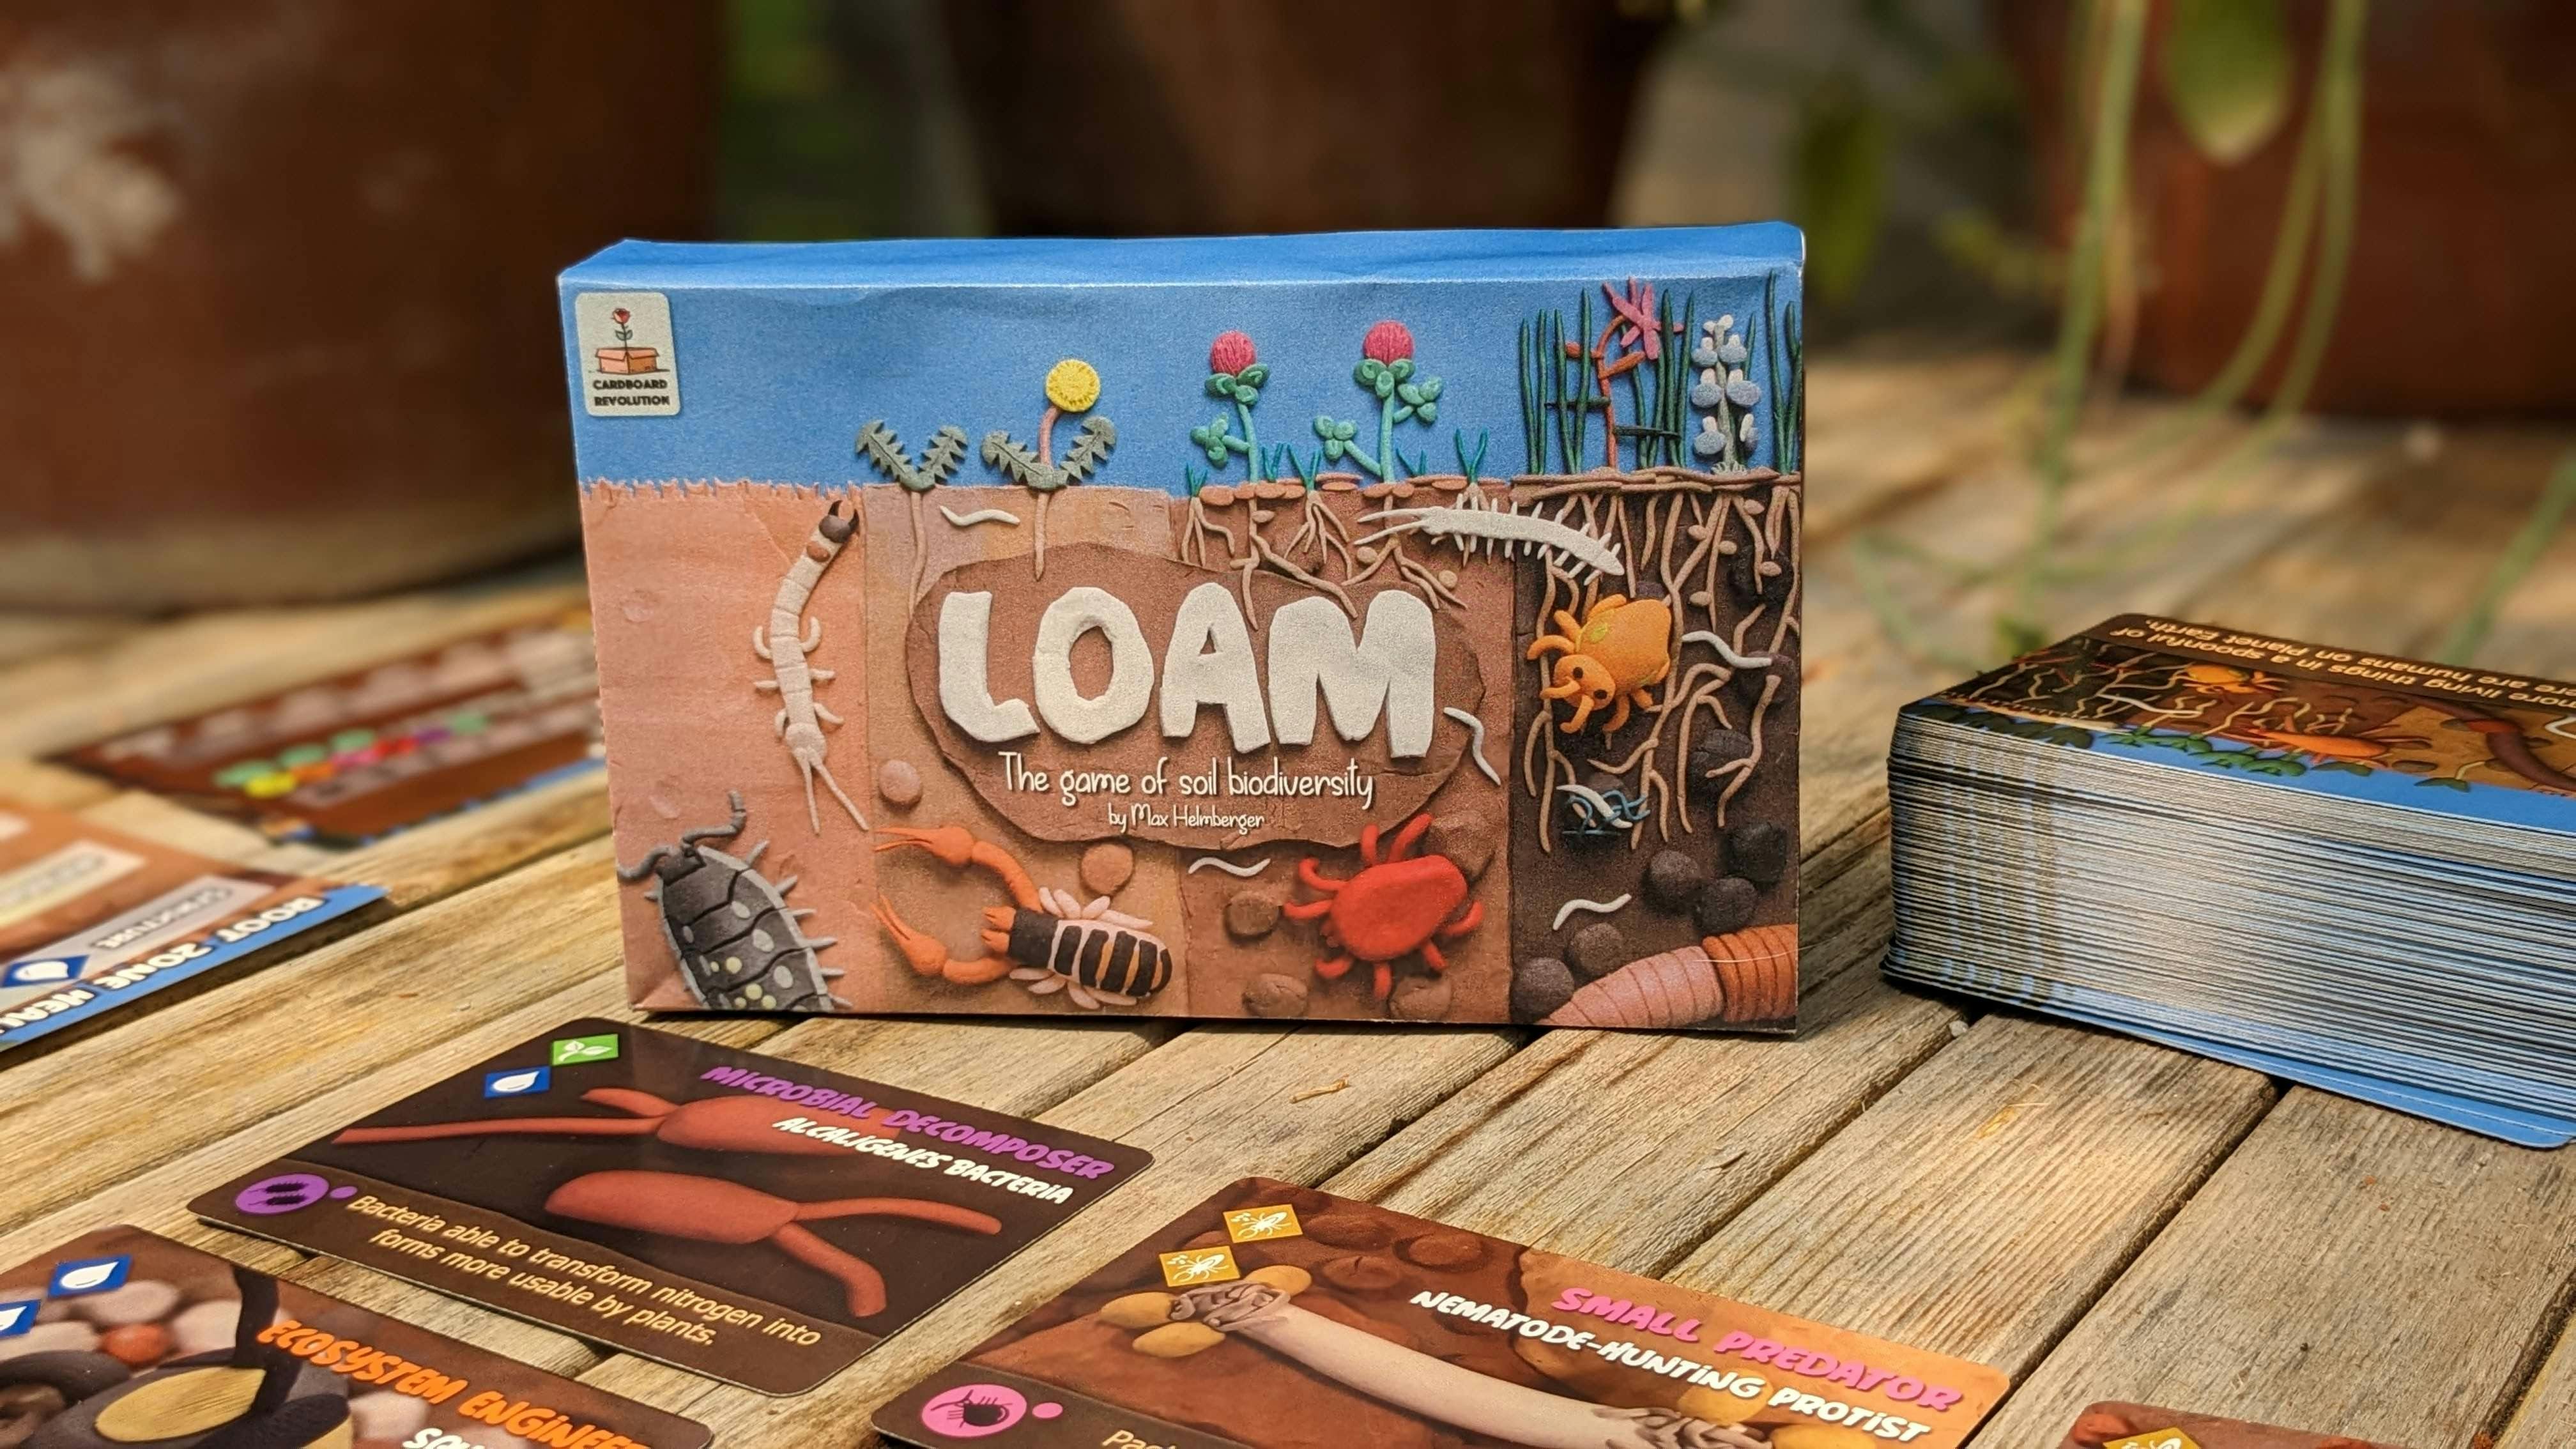 Loam. The game of soil biodiversity, by Max Helmberger